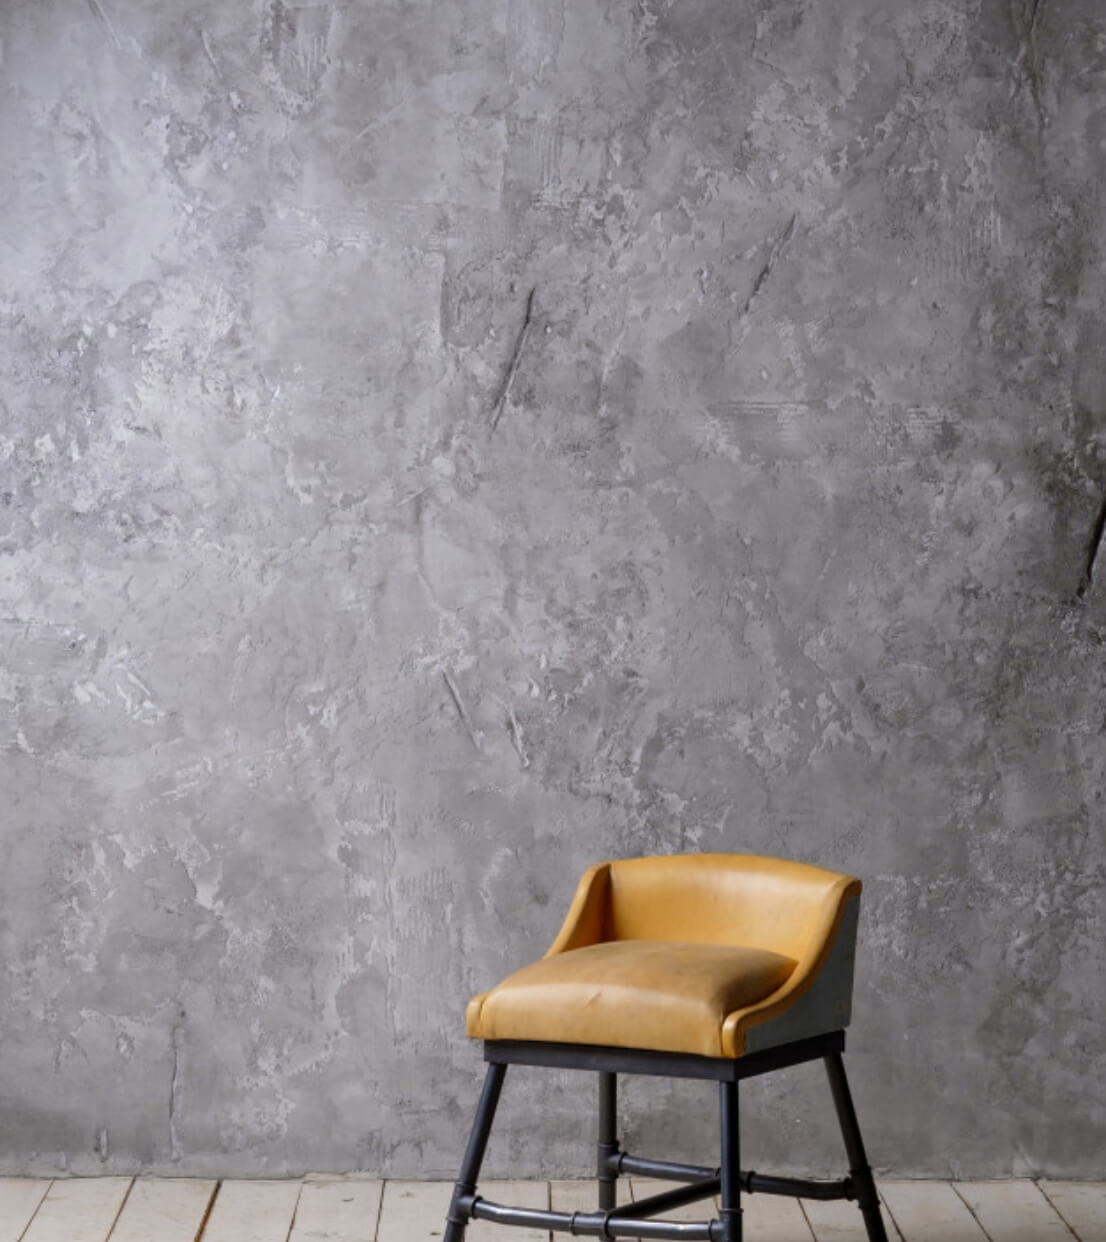 vintage loft interior with wooden floor textured aged grey concrete wall chair_76562 32@2x